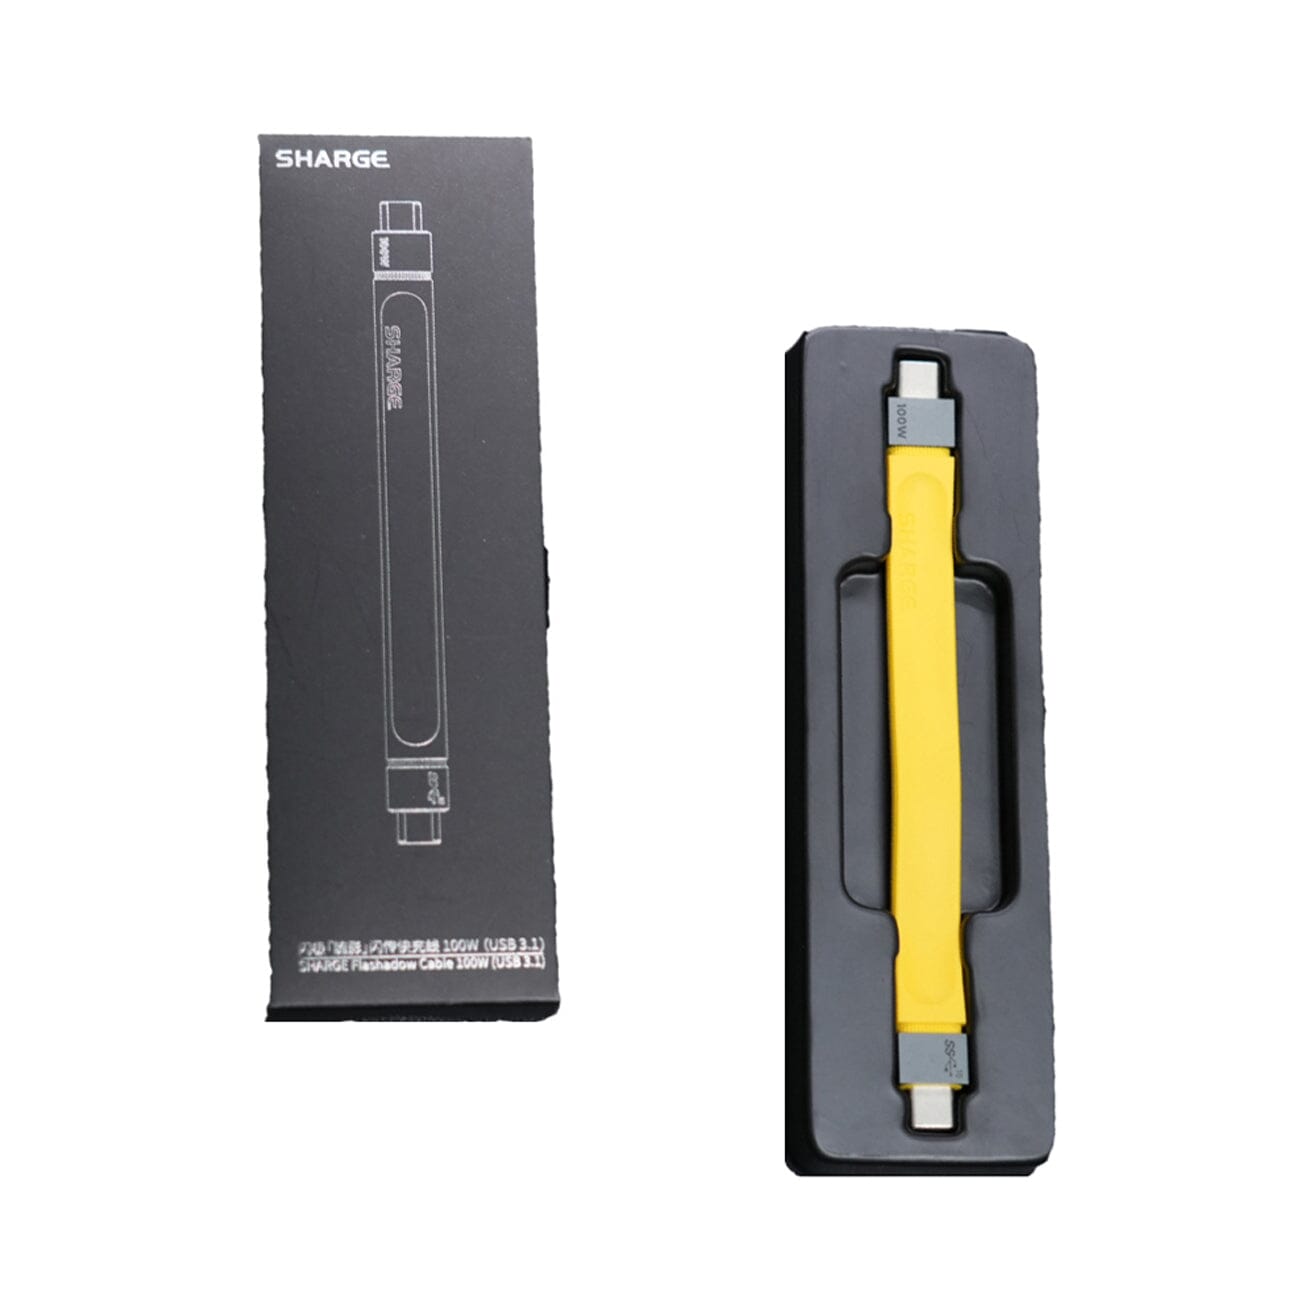 Shargeek SL017 100W USB-C to USB-C Cable 13.4cm E-Marker Chip SHARGEEK Yellow 